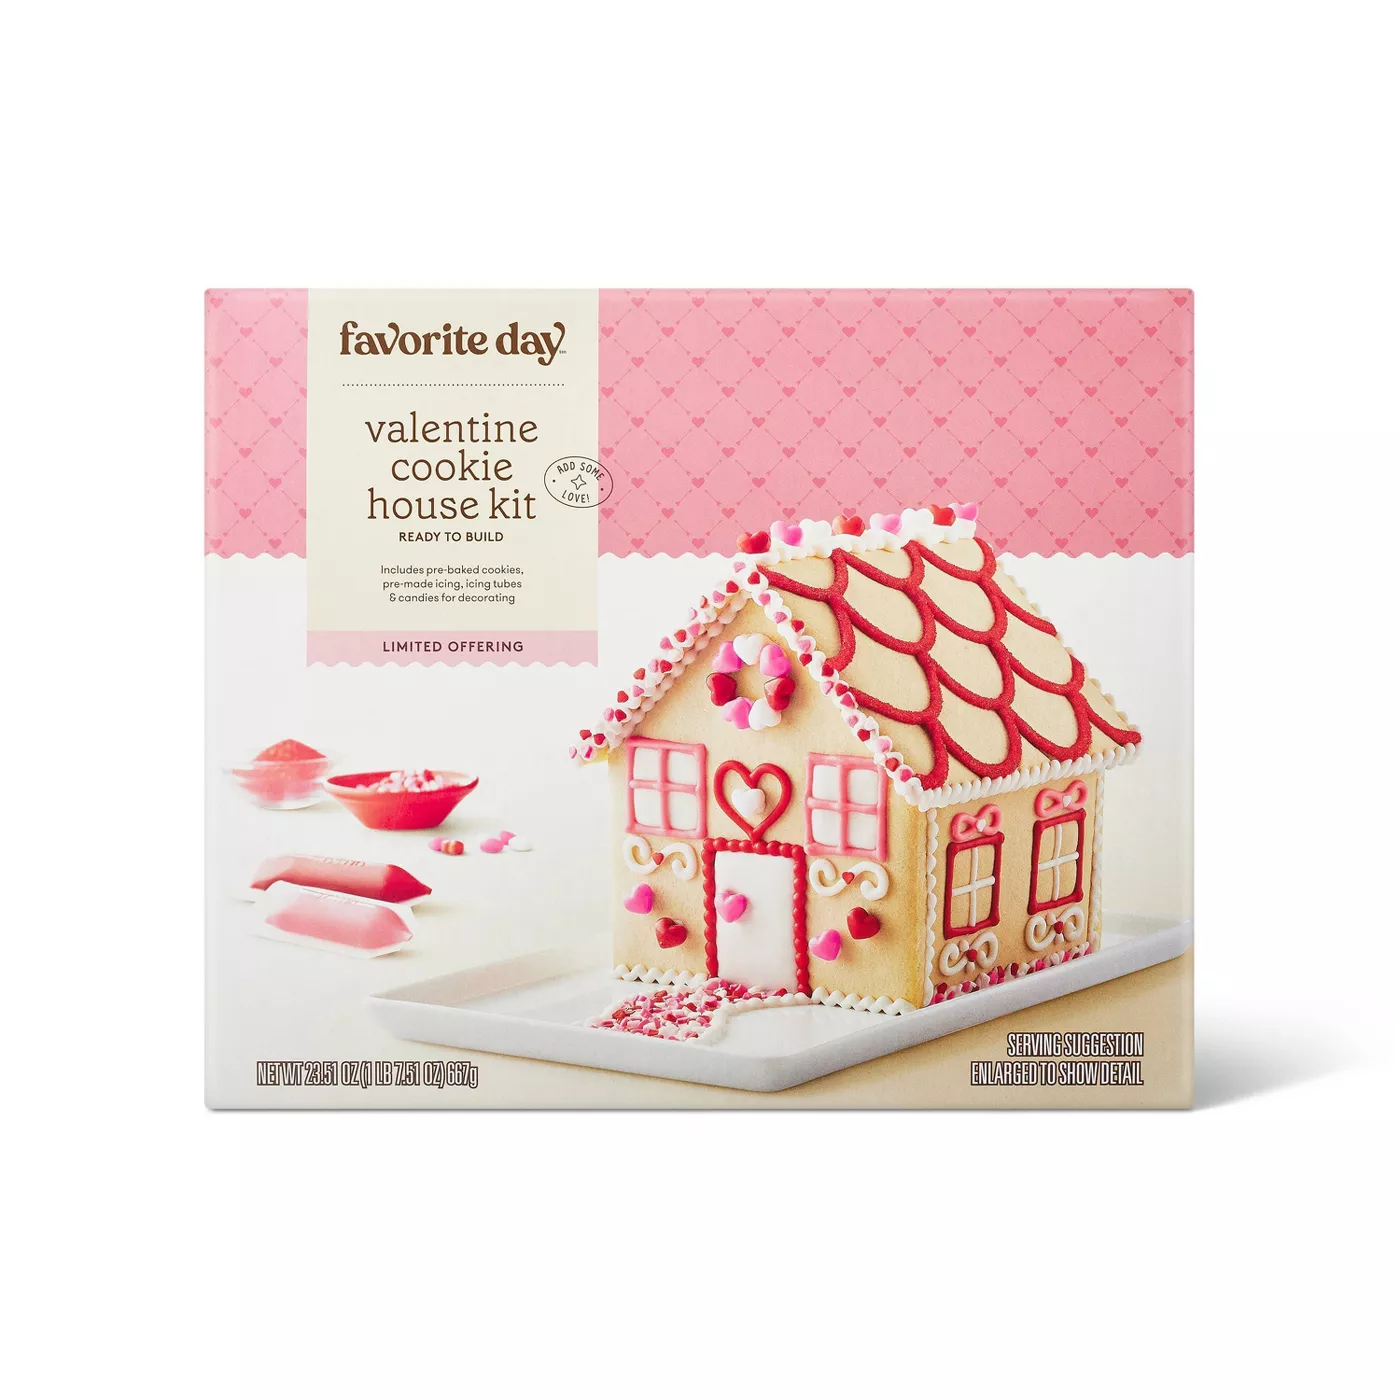 Valentine's Cookie House Kit - 23.51oz - Favorite Day™ - image 1 of 7